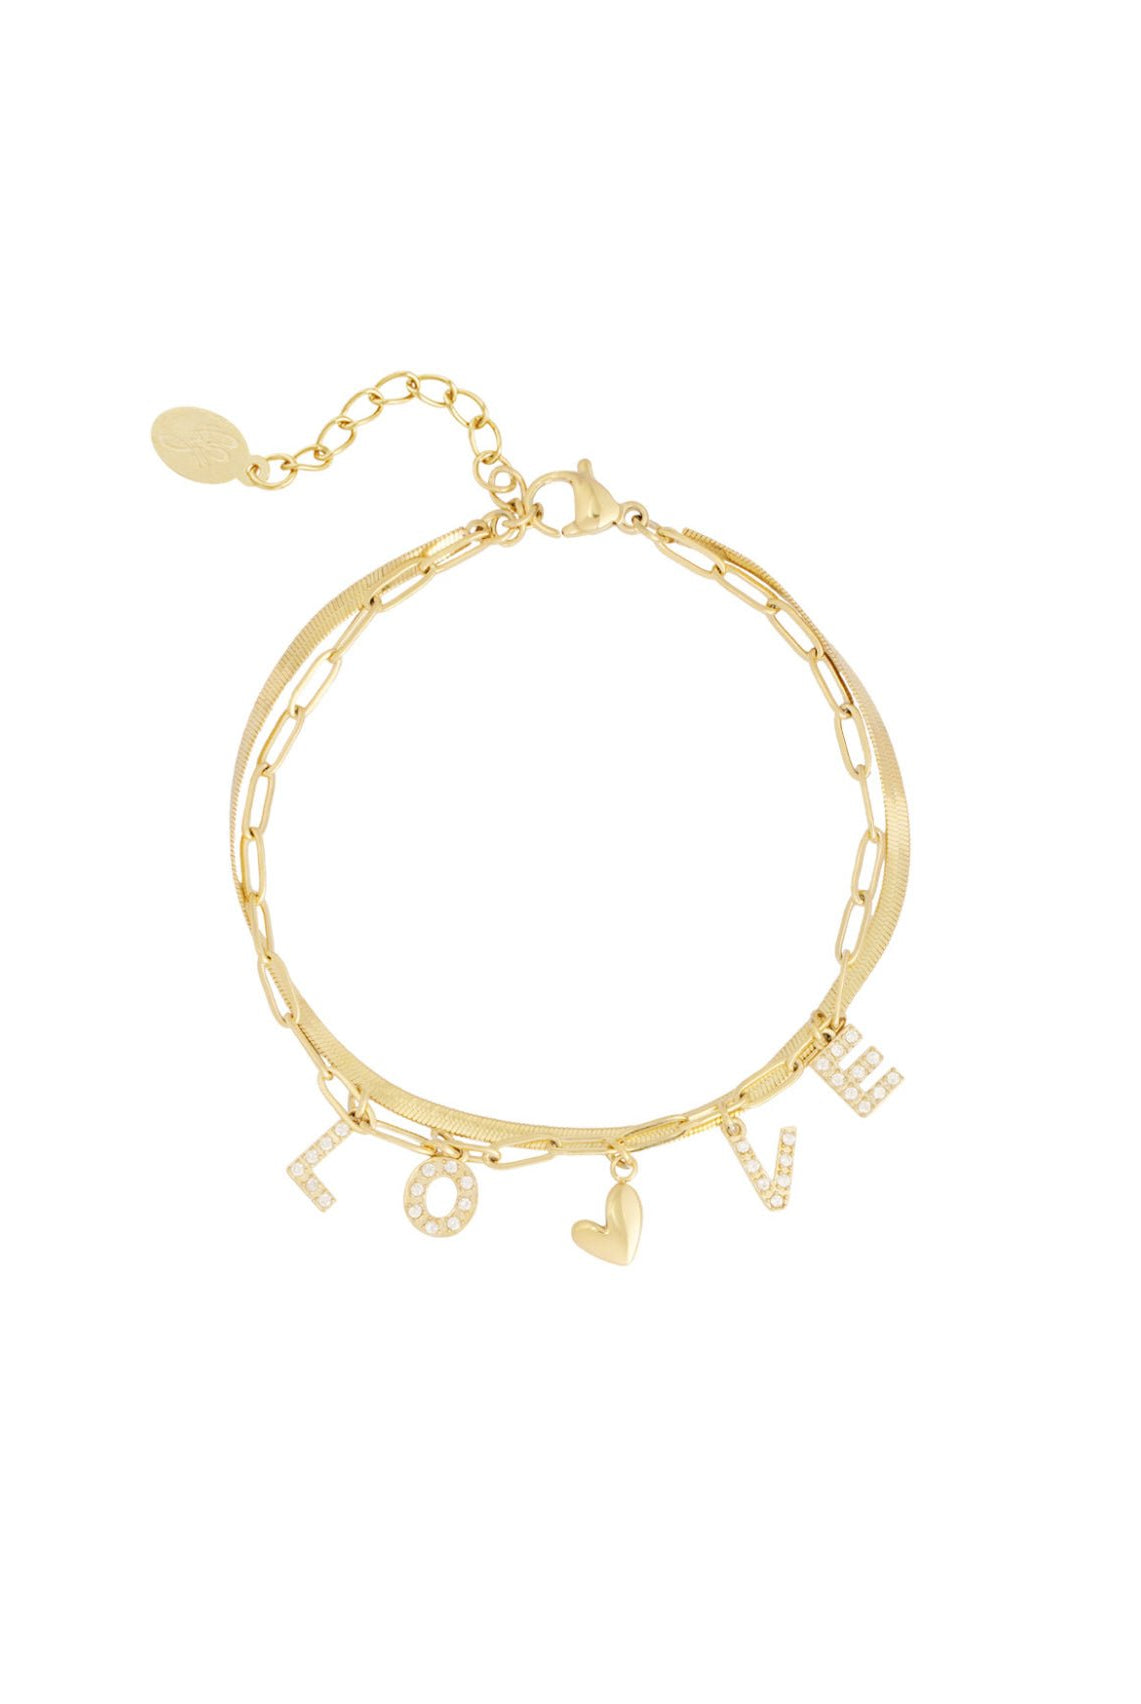 ♥︎LOVE LETTER BLING ARMBAND - My Favourites